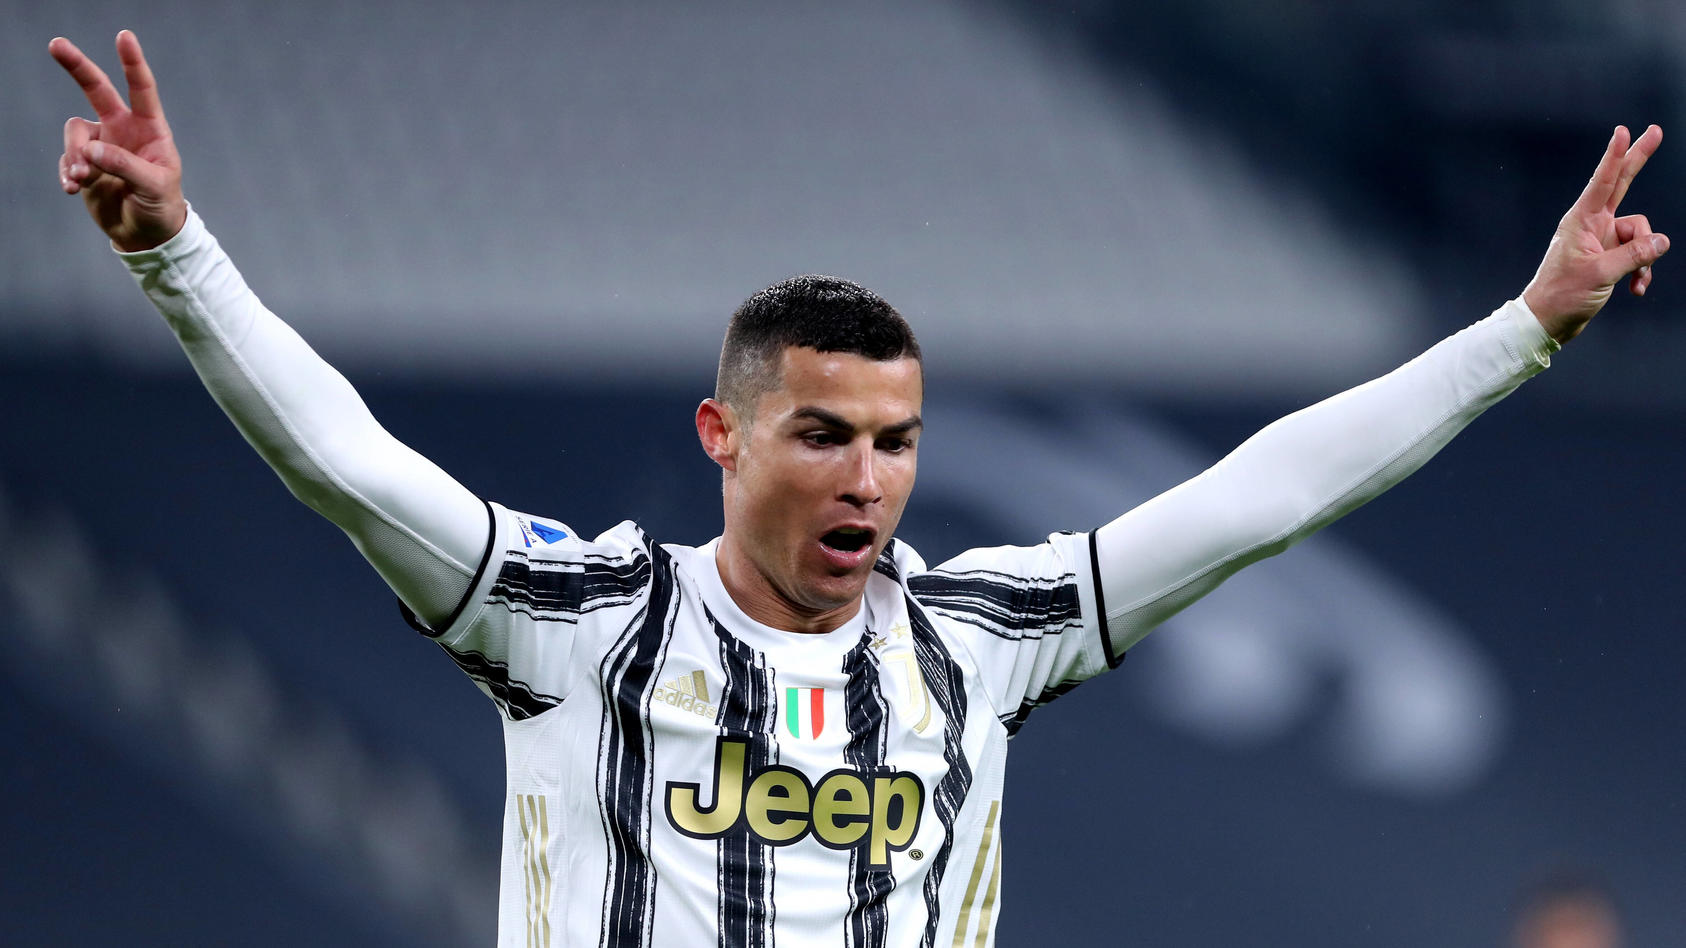  Cristiano Ronaldo of Juventus Fc celebrate after scoring a goal during the Serie A match between Juventus FC and Udinese Calcio at Allianz Stadium Turin Italy on 03 January 2021. Turin Allianz Stadium Turin Italy Copyright: xMarcoxCanonierox SP24-04